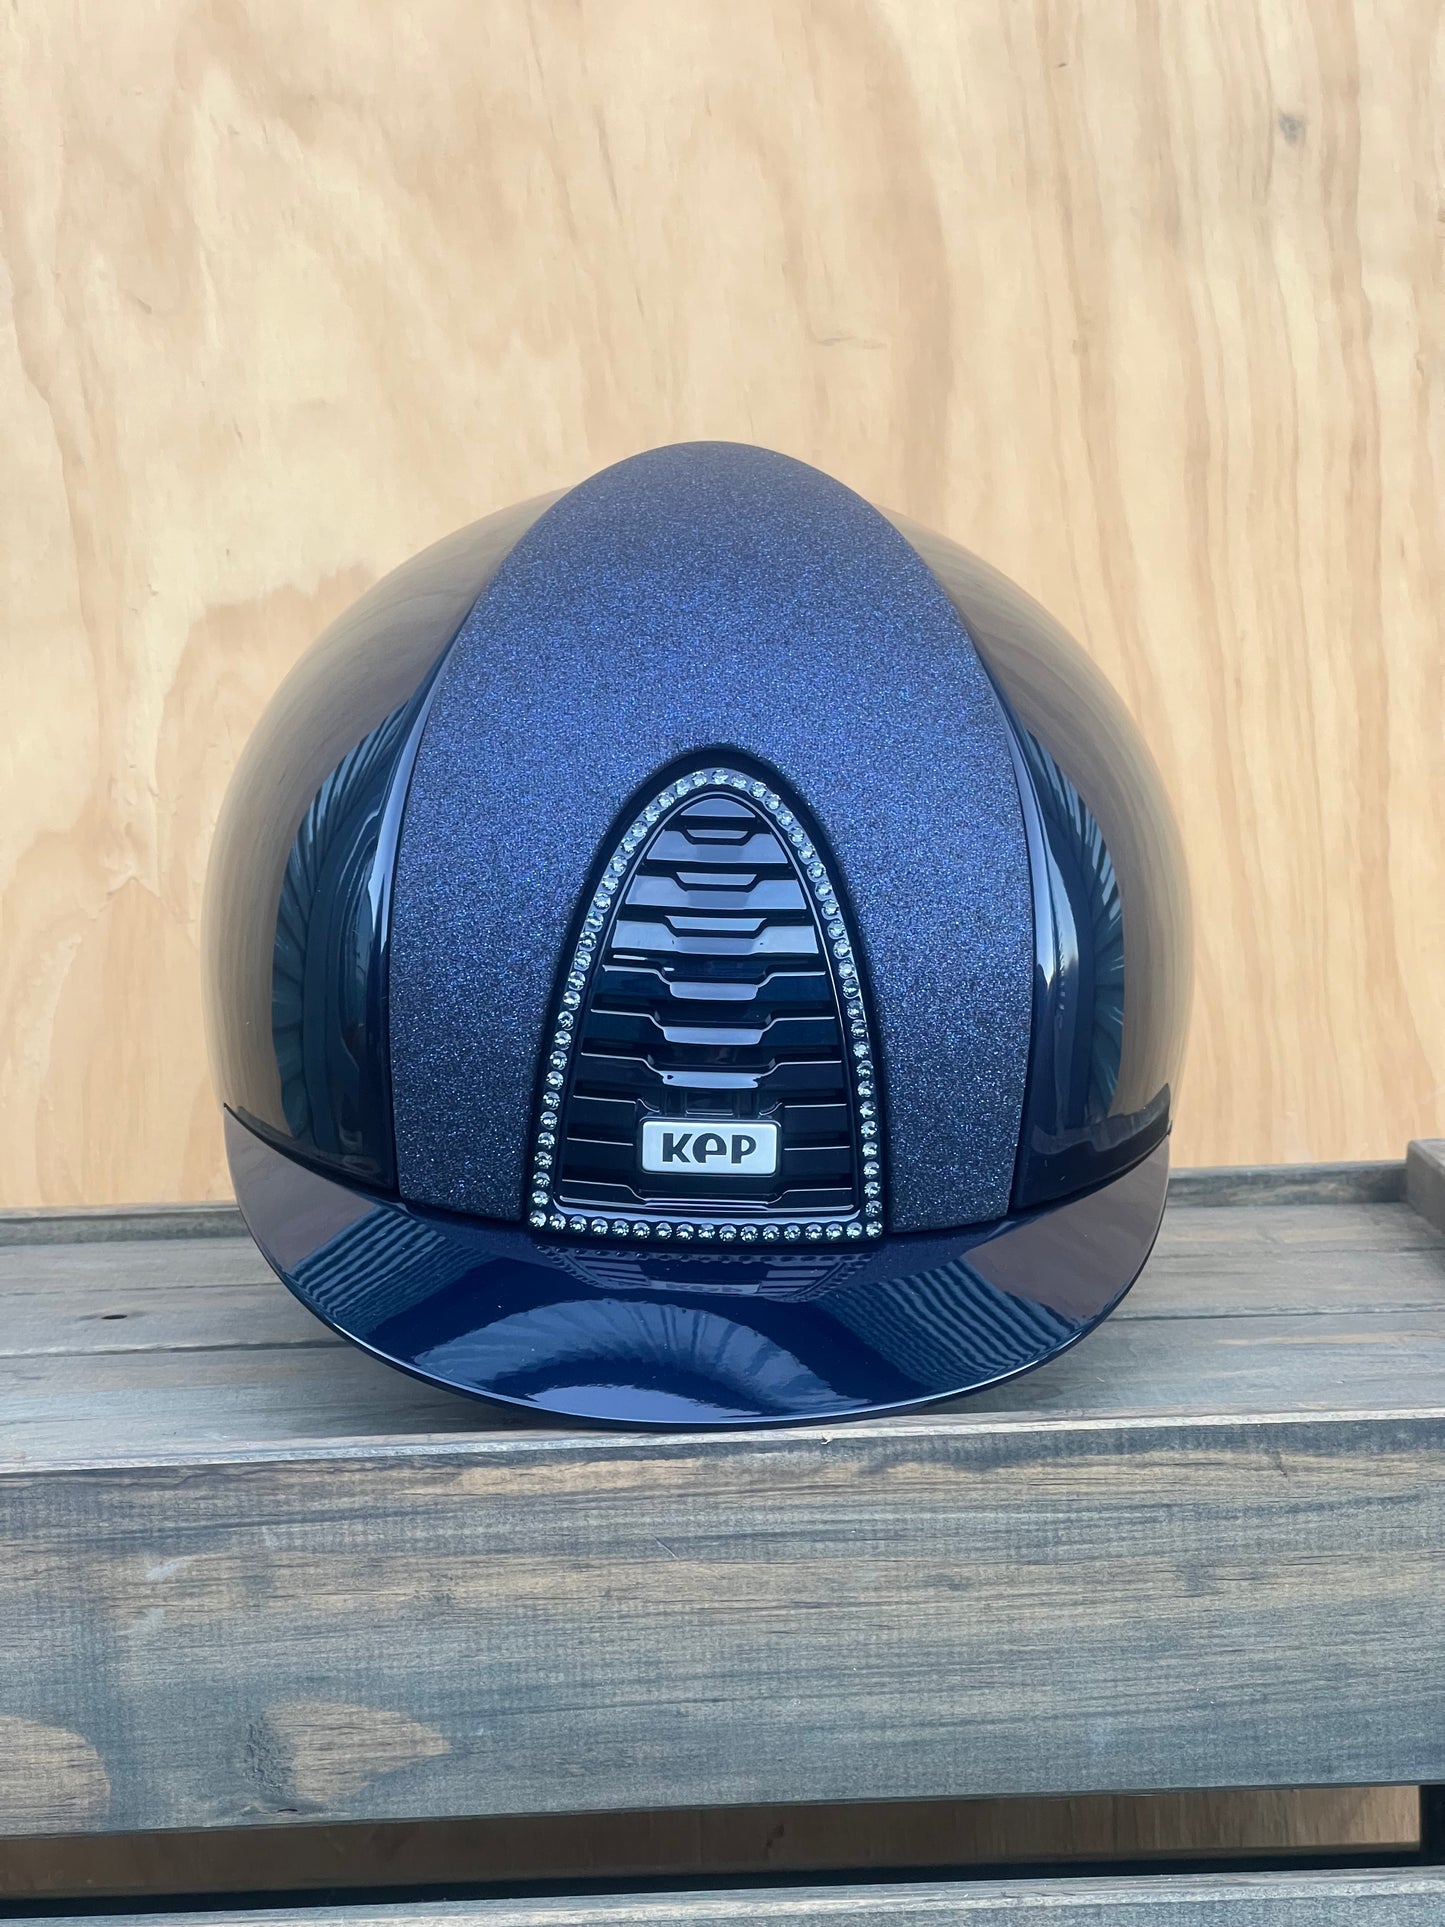 KEP CUSTOM HELMET POLISHED BLUE WITH STAR FRONT AND NAVY CRYSTALS